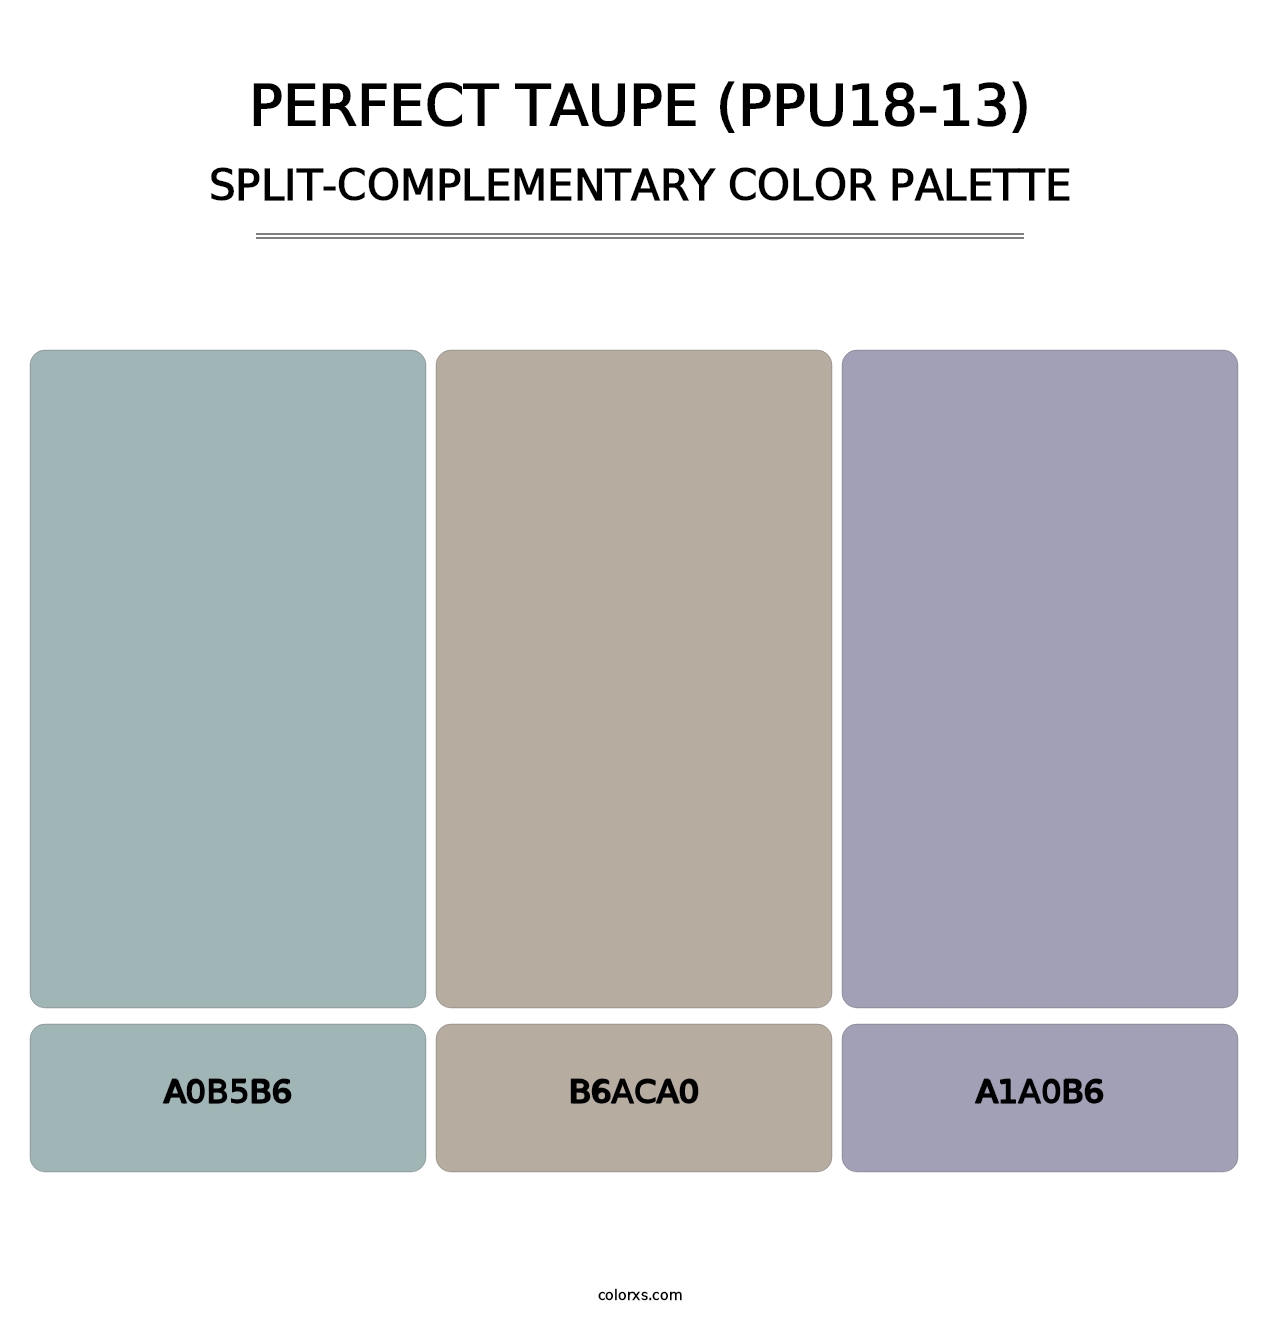 Perfect Taupe (PPU18-13) - Split-Complementary Color Palette